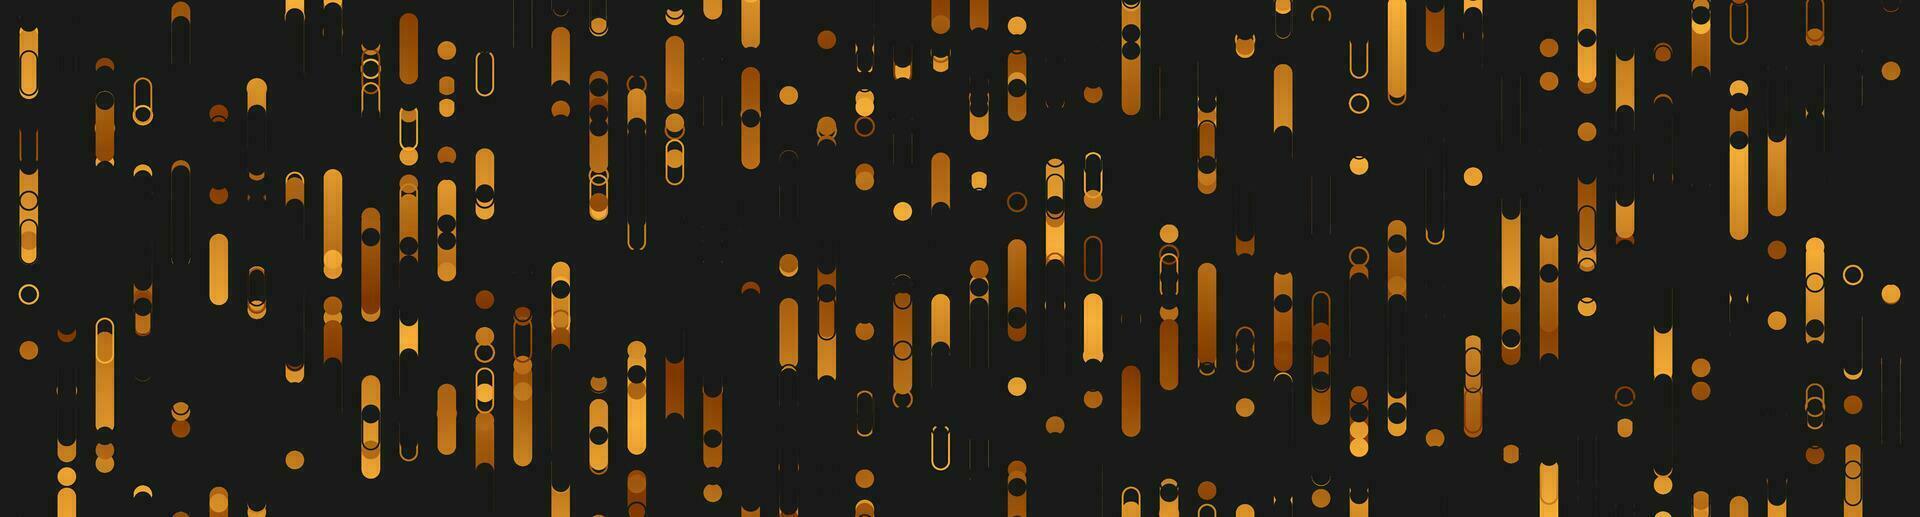 Bronze and black minimal geometric abstract background vector